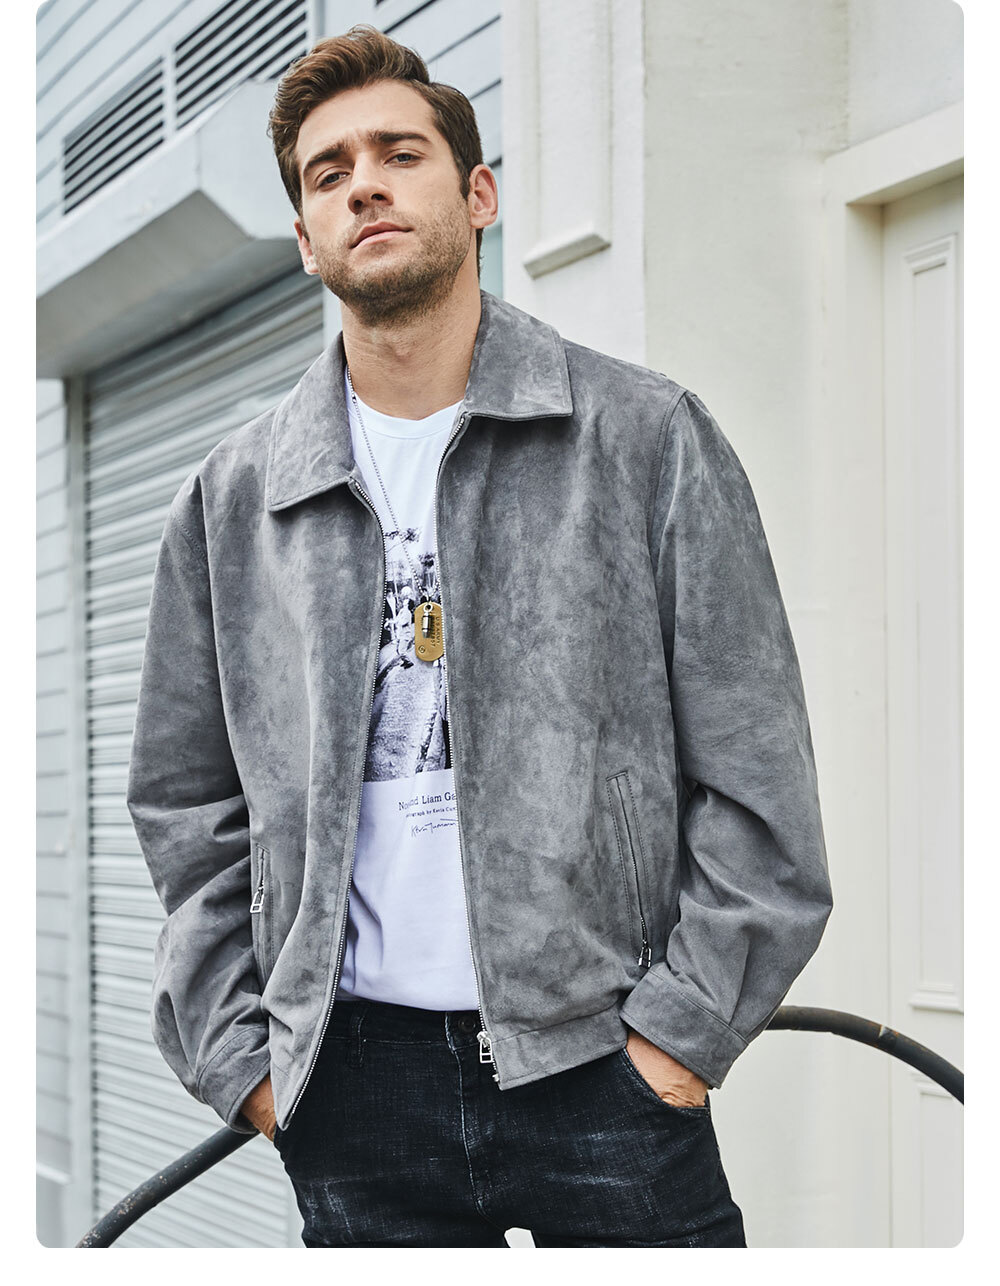 Men's Gray Suede Leather Jacket Bomber MXGX294 Buy flavor leather moto jacket| buy pigskin leather jacket